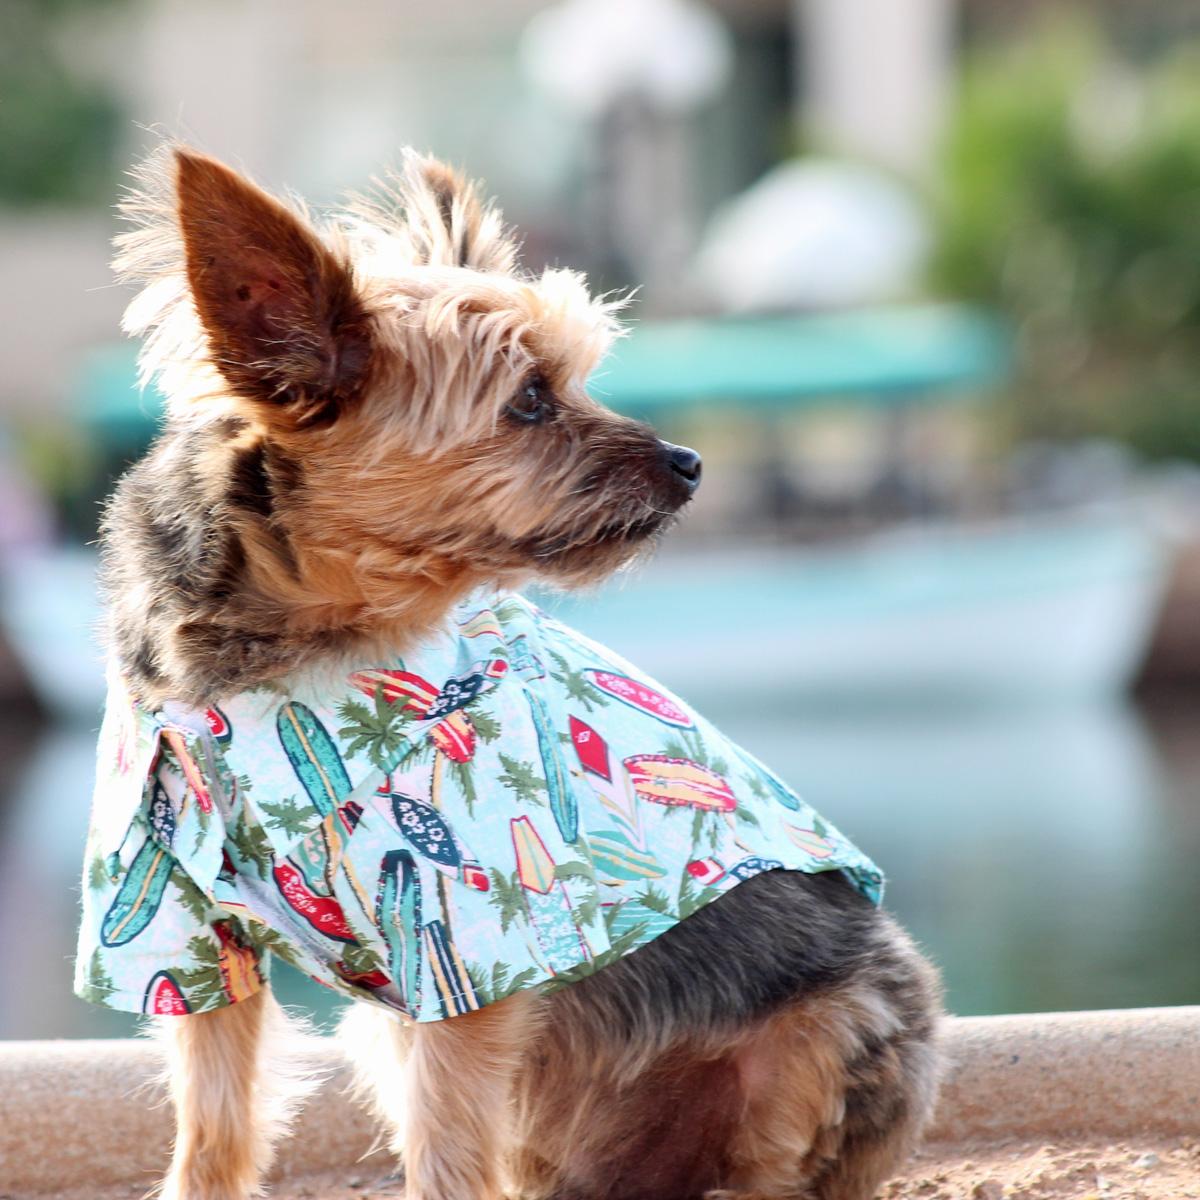 Hawaiian Camp Shirt by Doggie Design - Surfboards and Palms